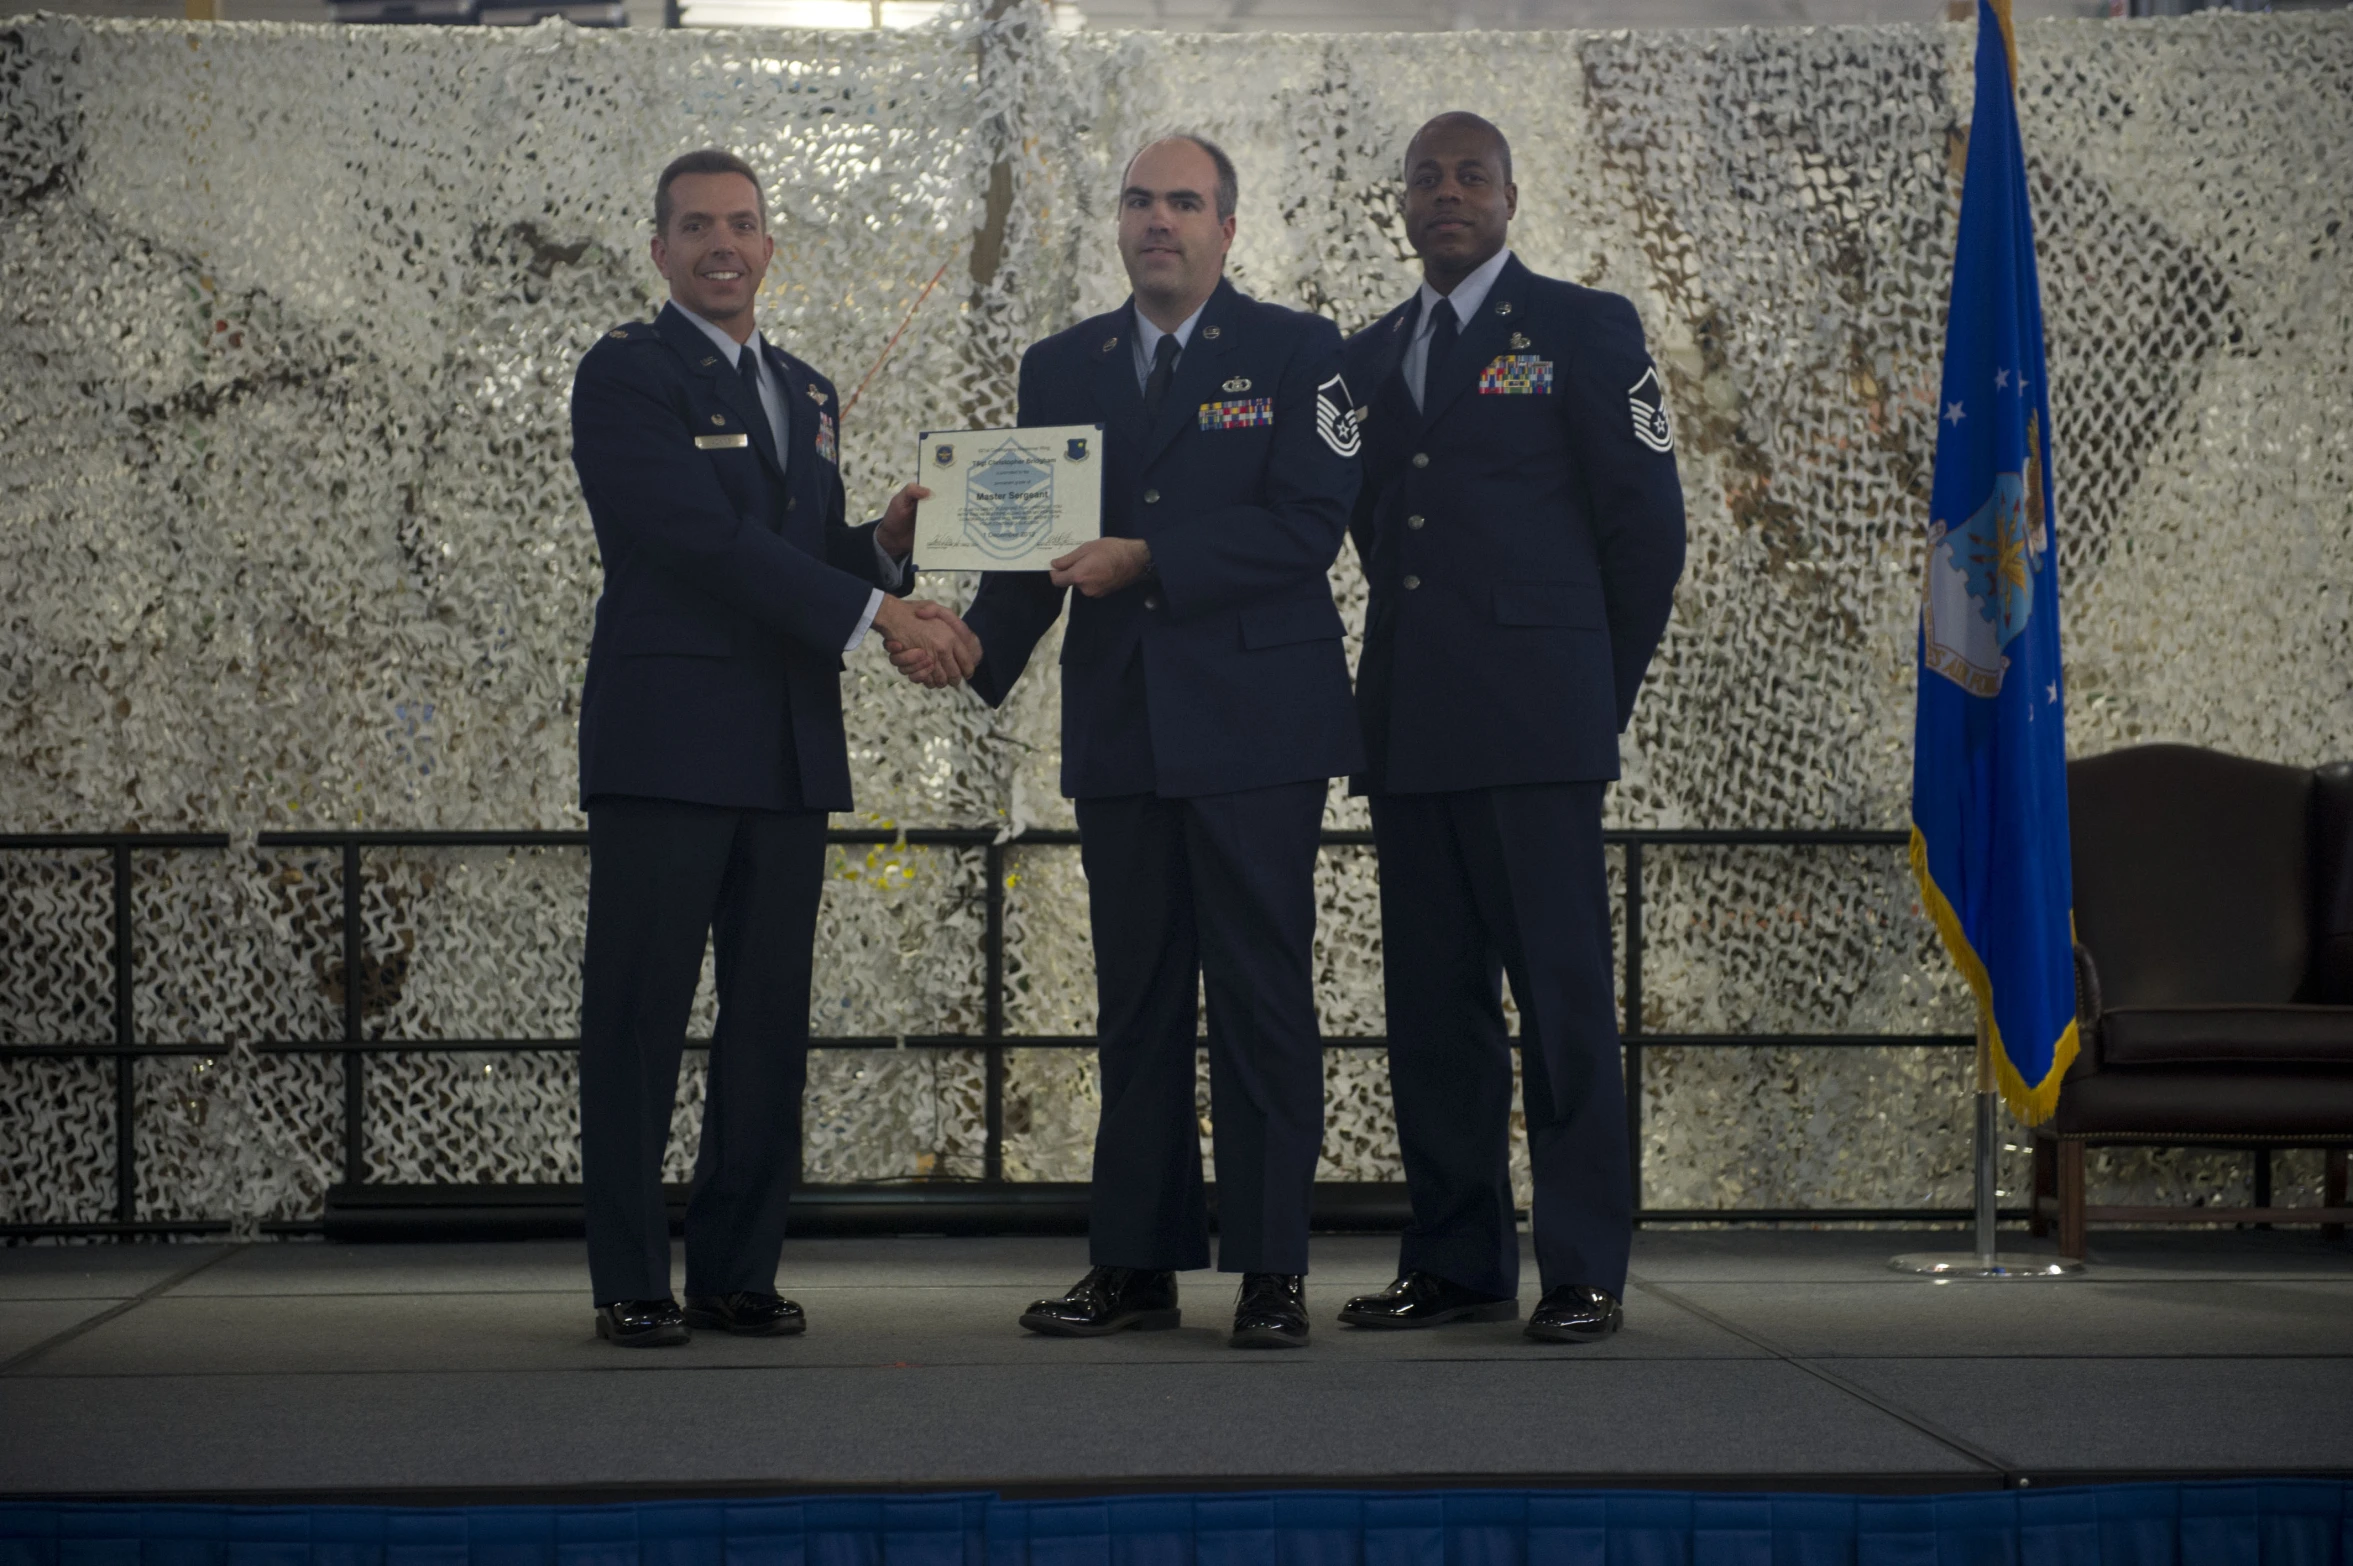 three men are dressed in blue, while one holds an award